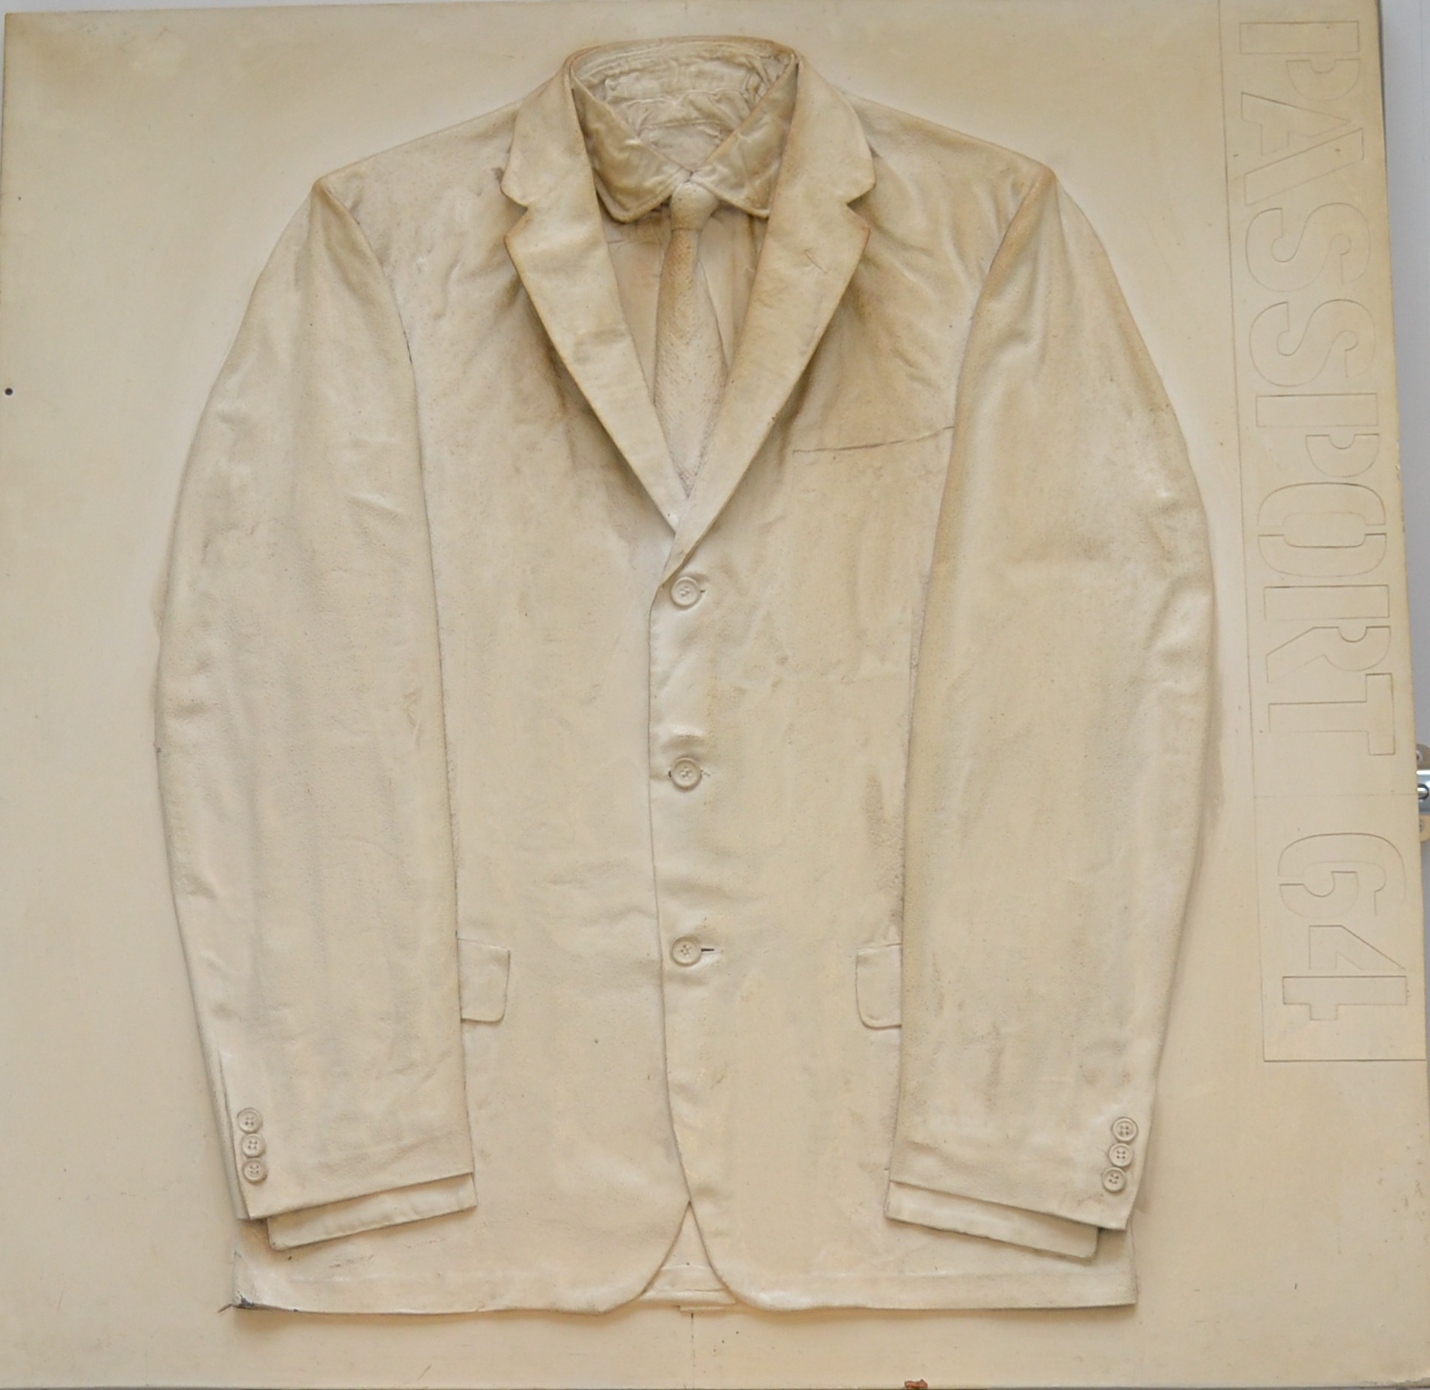 Z Donnagh's suit, painted white, display